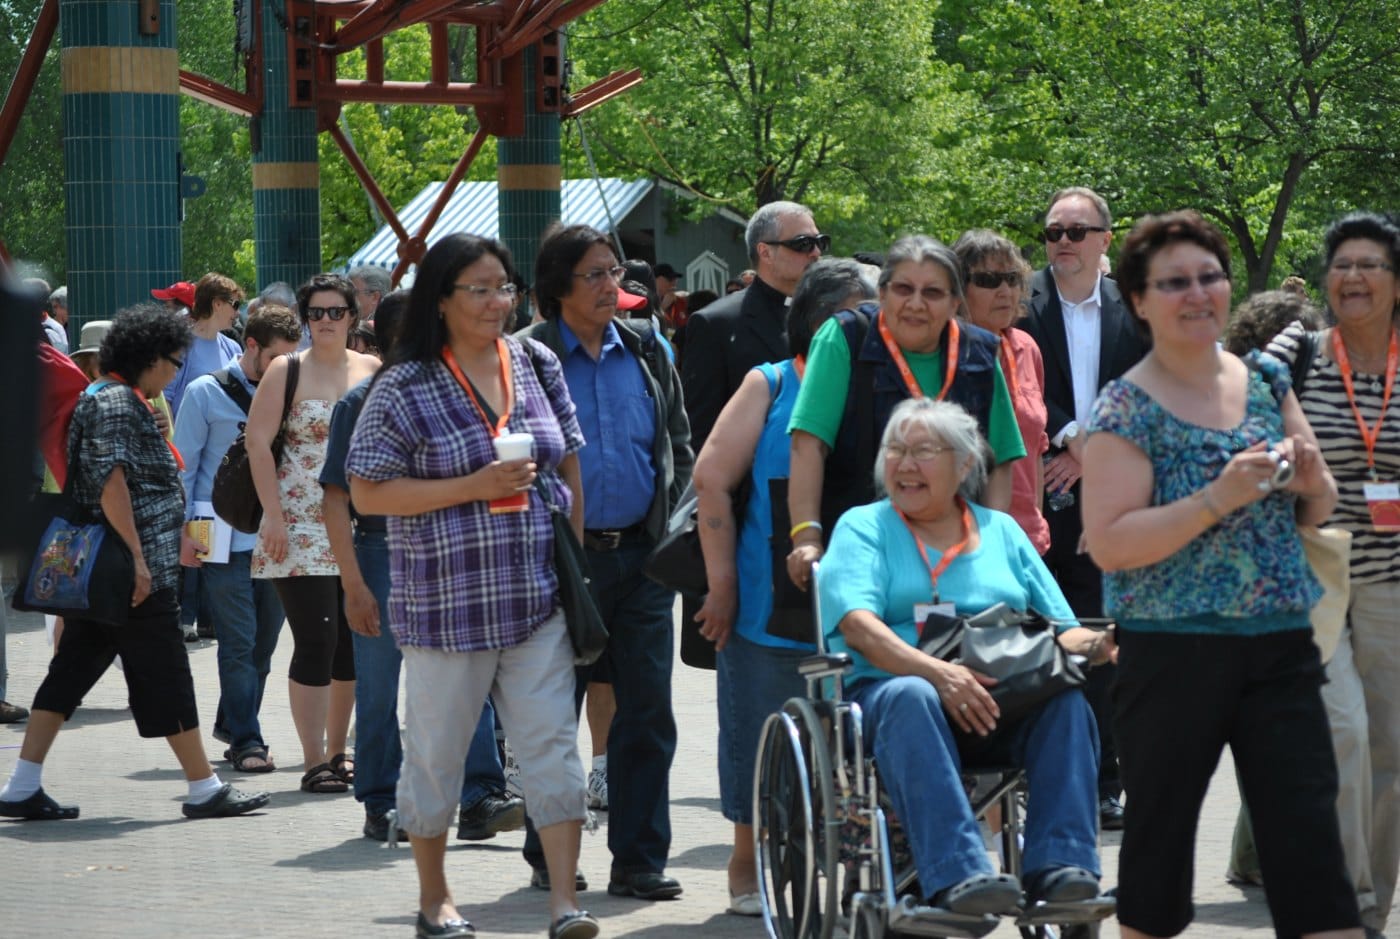 Residential schools survivors, their families, church and government representatives join a "Unity Walk" marking the start of the first TRC national event in Winnipeg June 16. Photo: Marites N. Sison